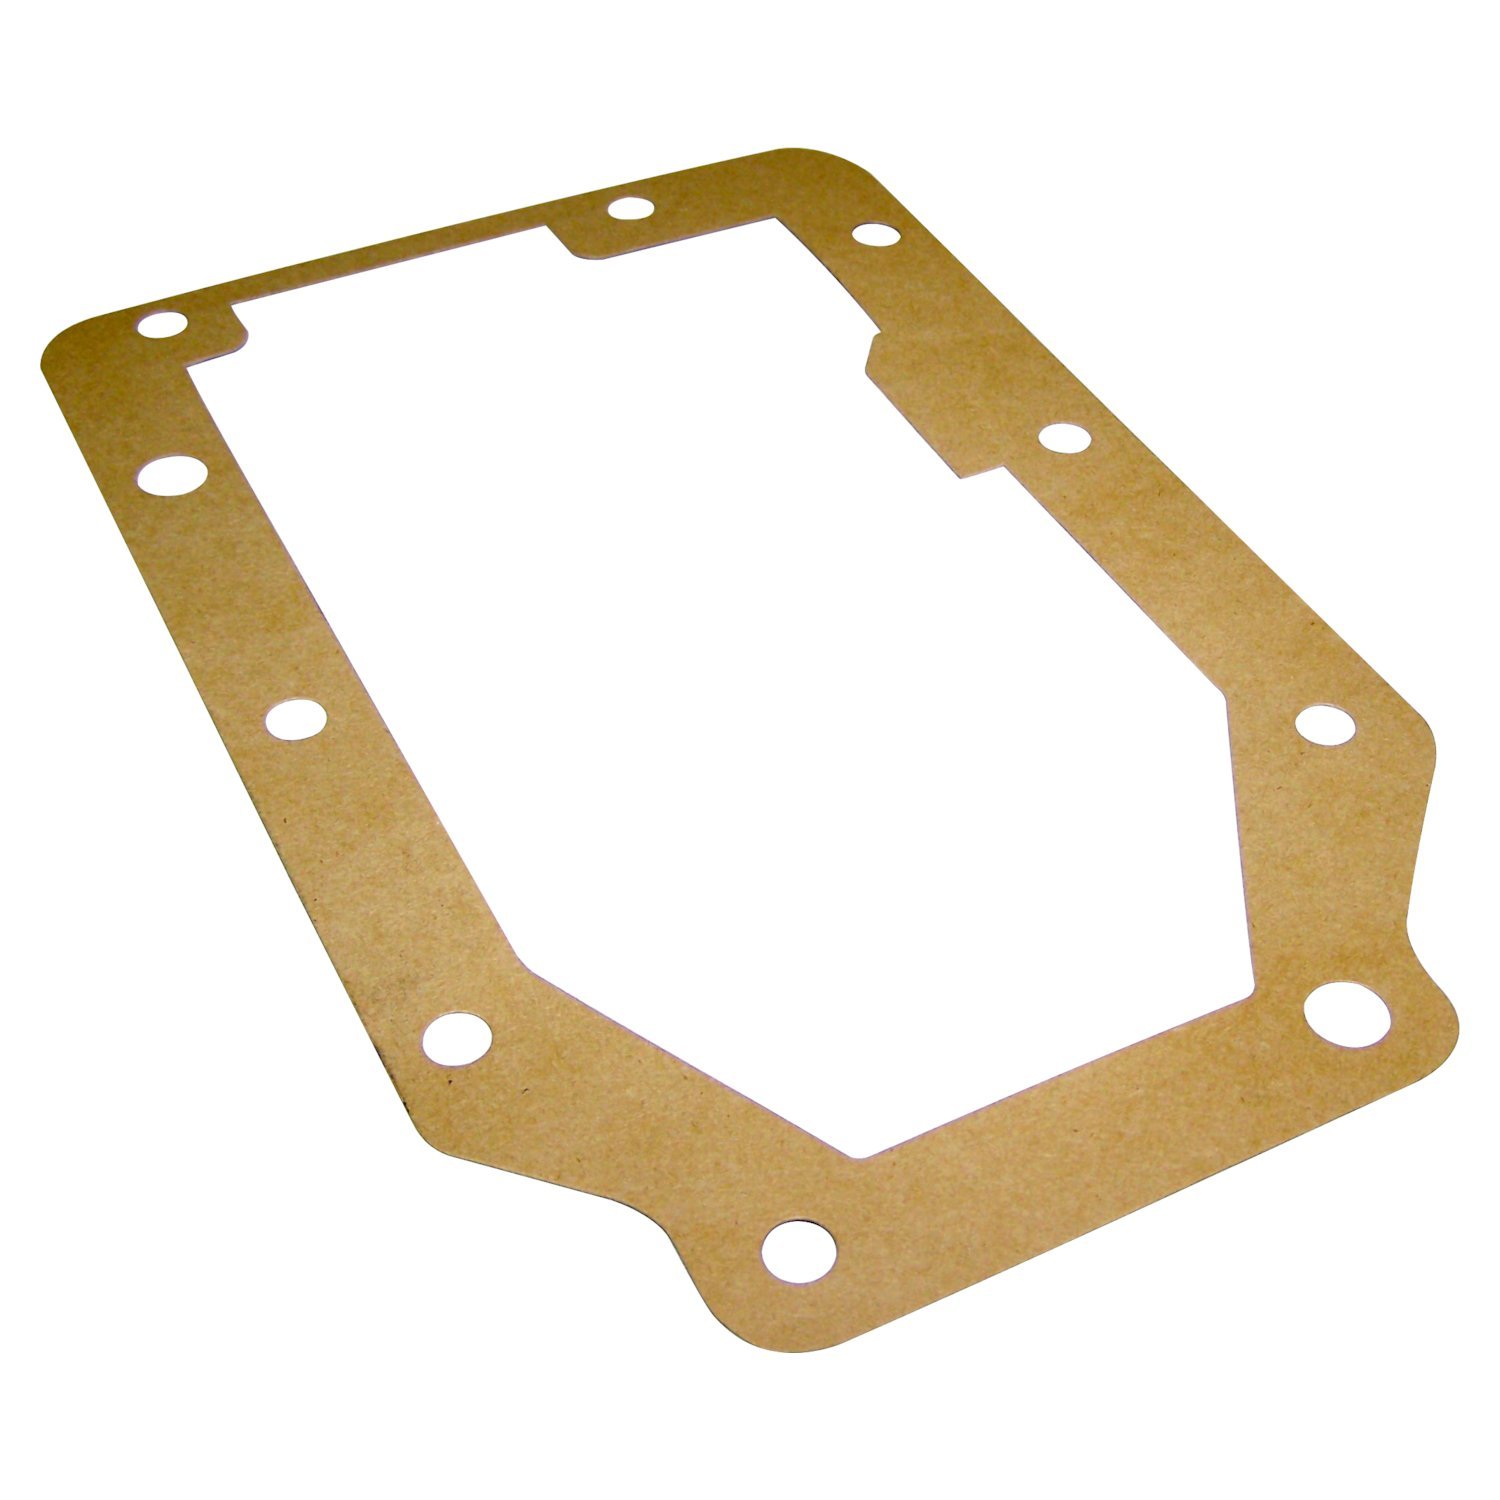 Shift Cover Gasket for 80-86 Jeep CJs, SJ, J-Series w/ T176, T177 Trans.